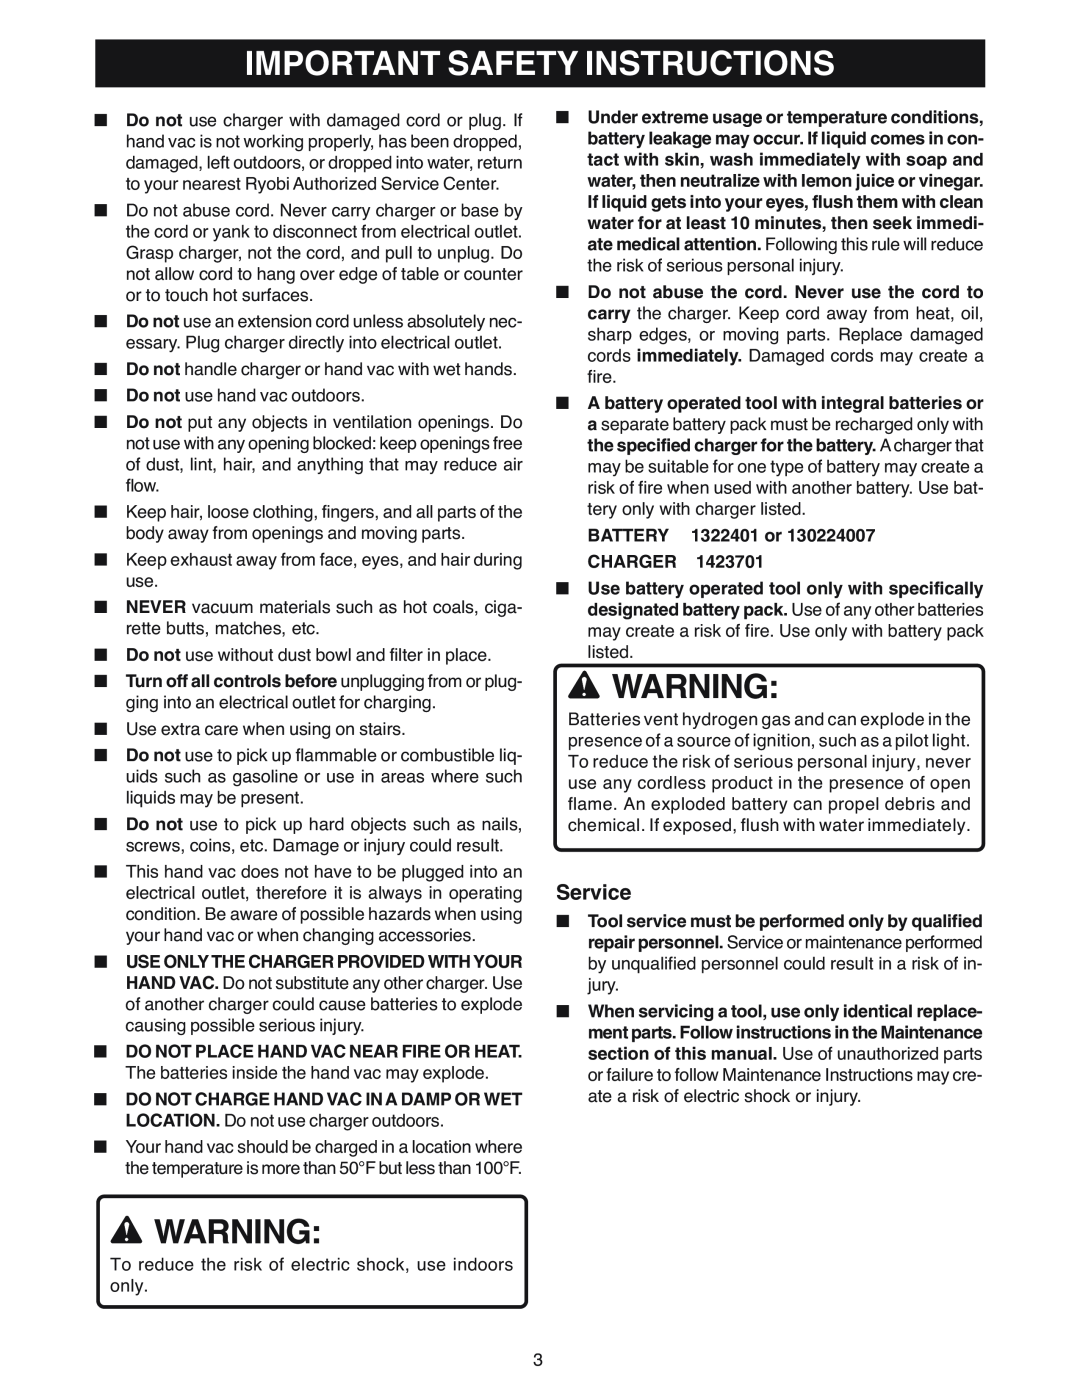 Ryobi VC180 manual Important Safety Instructions, Service, BATTERY 1322401 or CHARGER 